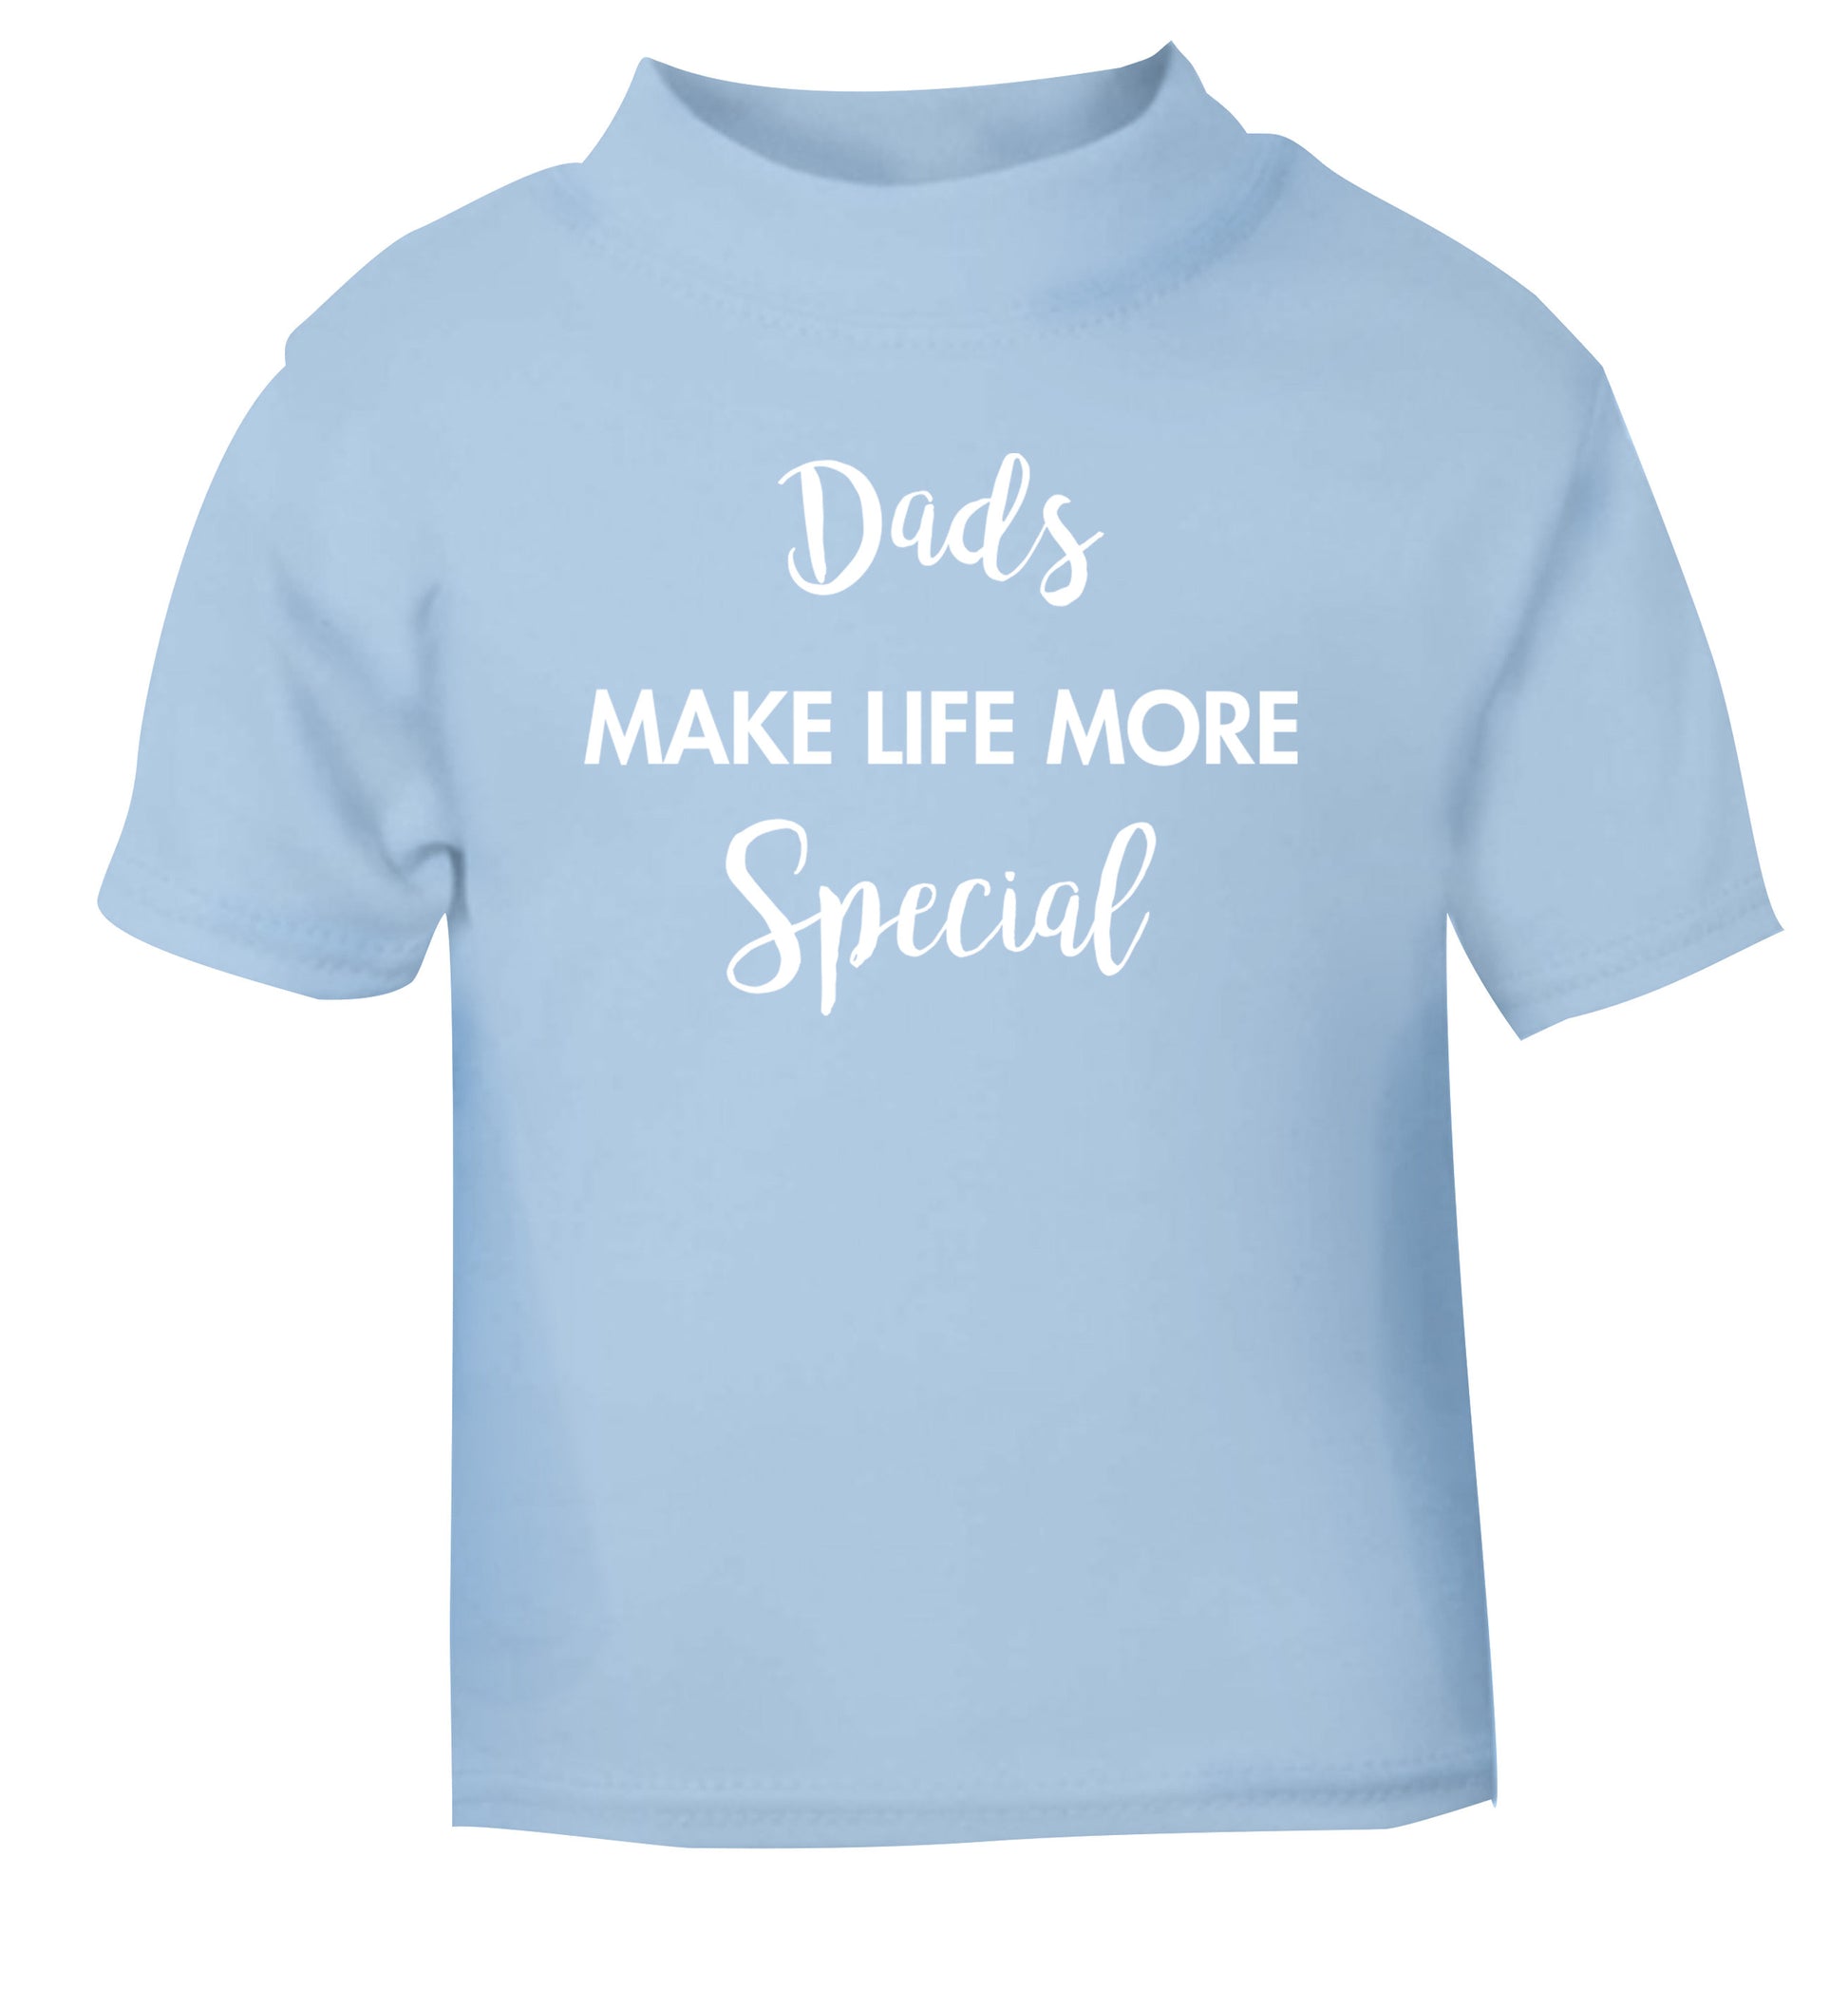 Dads make life more special light blue Baby Toddler Tshirt 2 Years